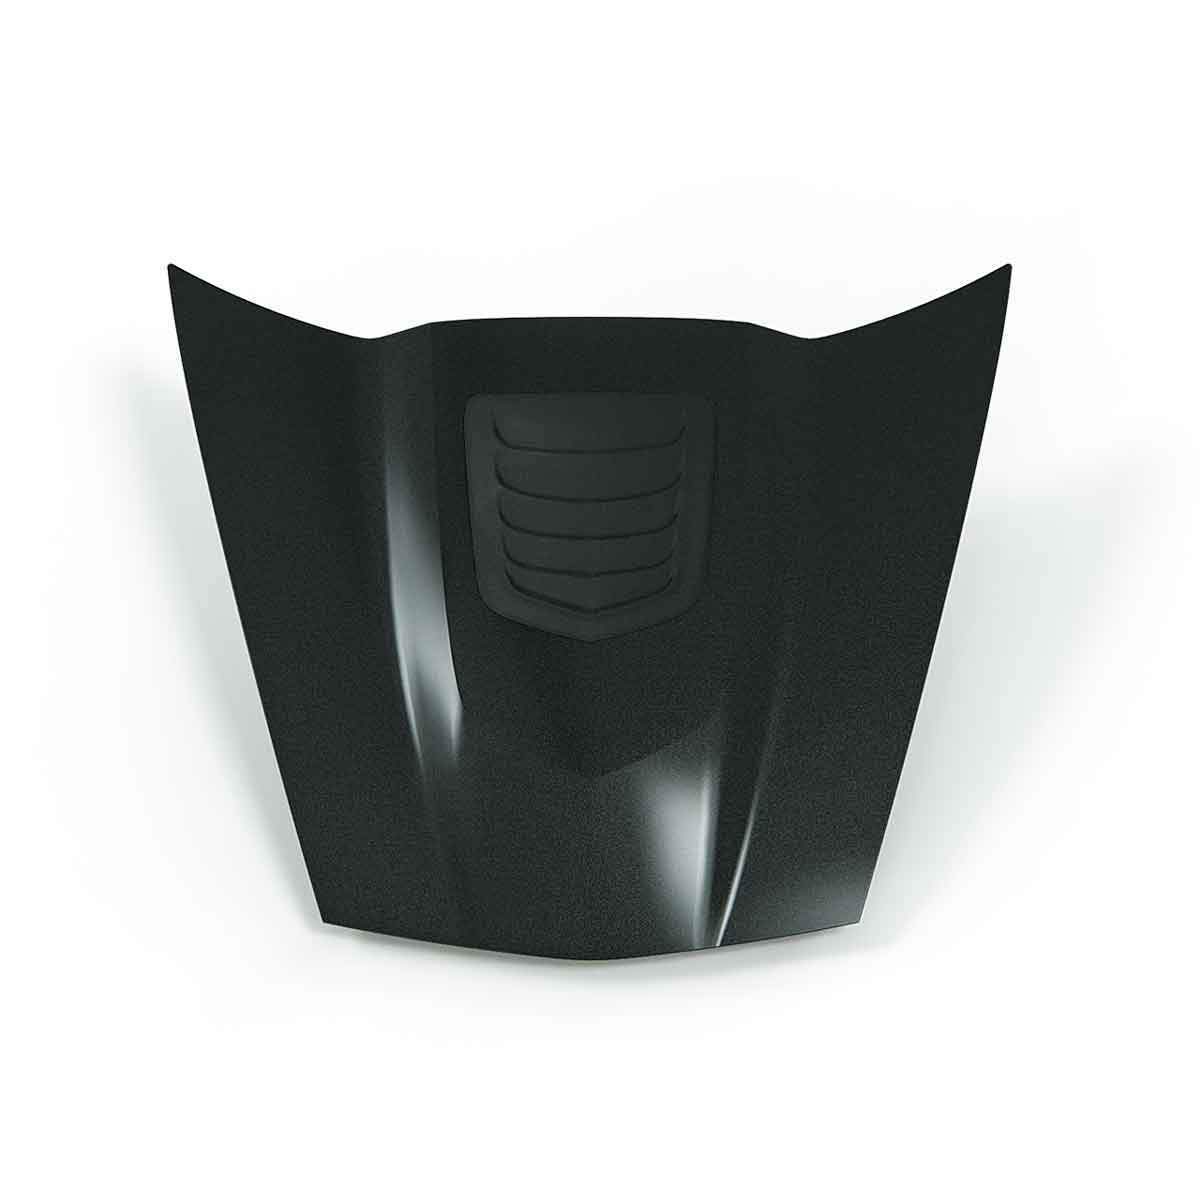 C6 ZR1 Hood with Polycarbonate Window and Louvered Insert, SKU 27-4-003 PRM 27-4-013.